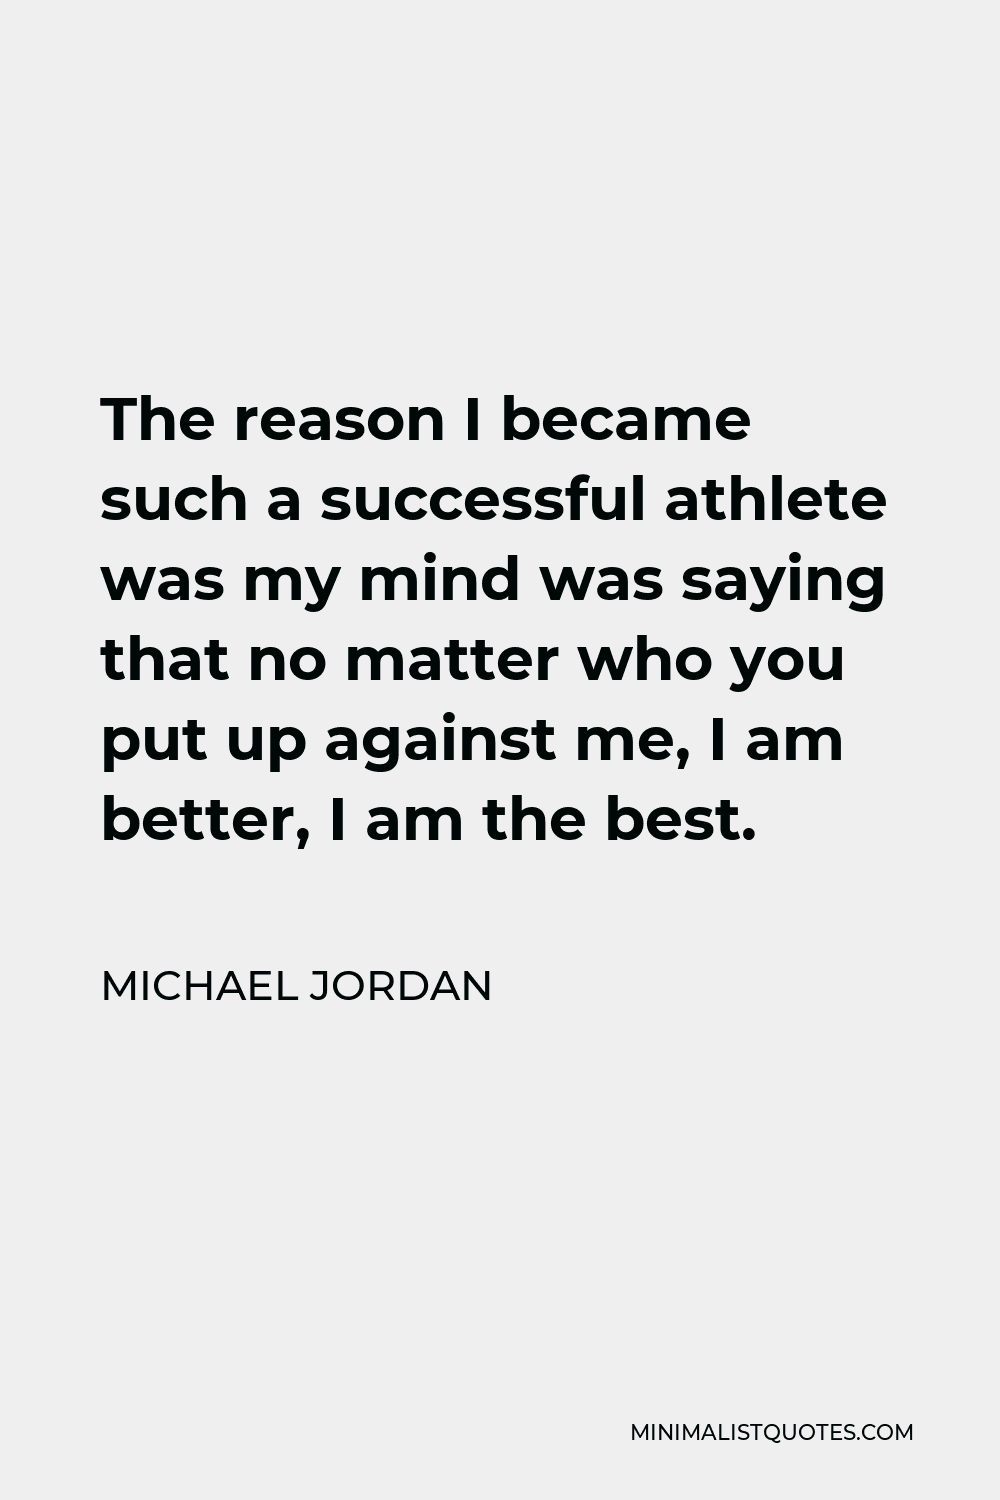 Michael Jordan Quote - The reason I became such a successful athlete was my mind was saying that no matter who you put up against me, I am better, I am the best.